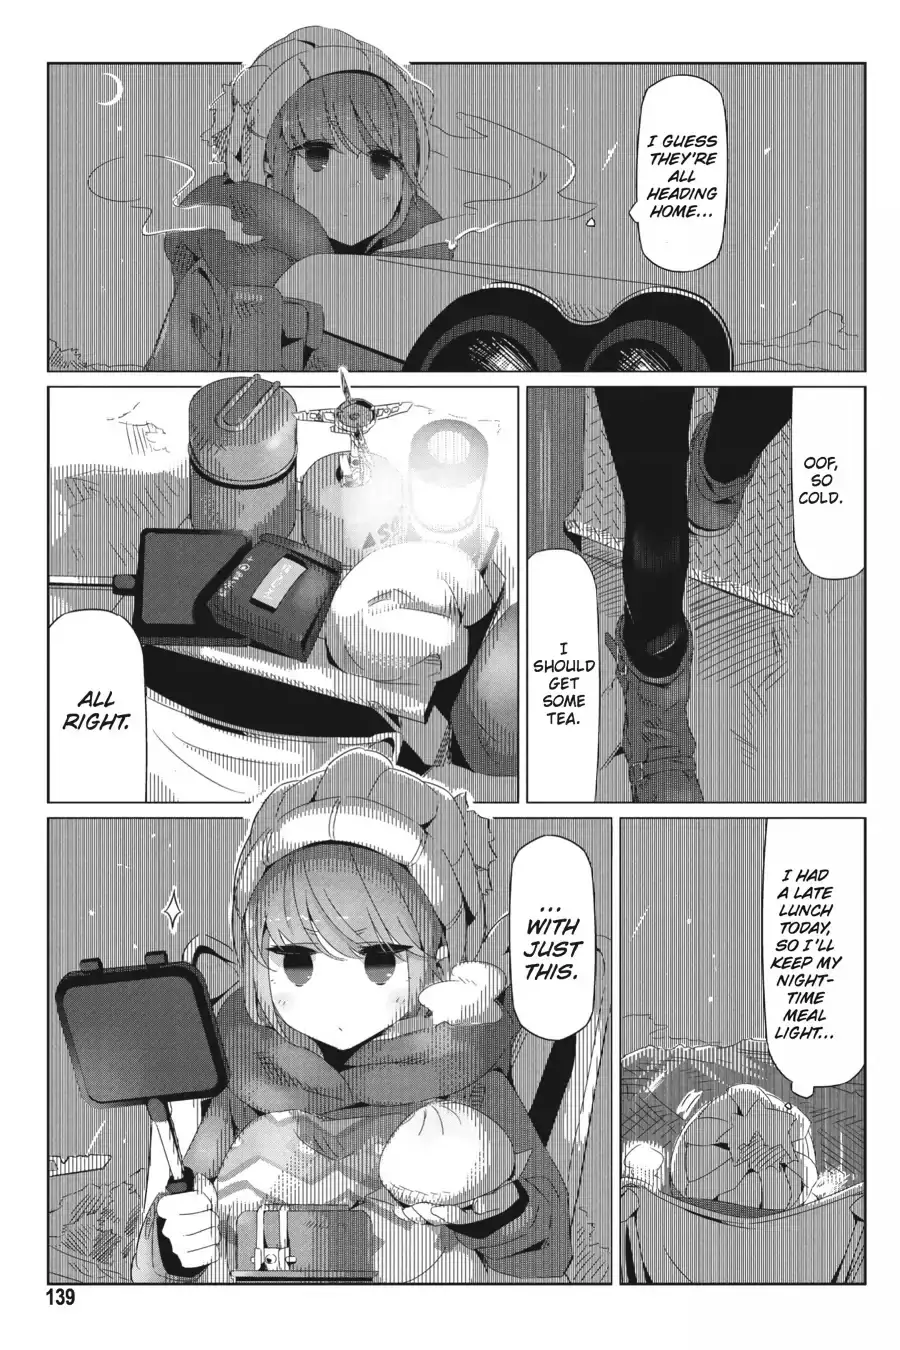 Yurucamp - 18 page 16-7680be54